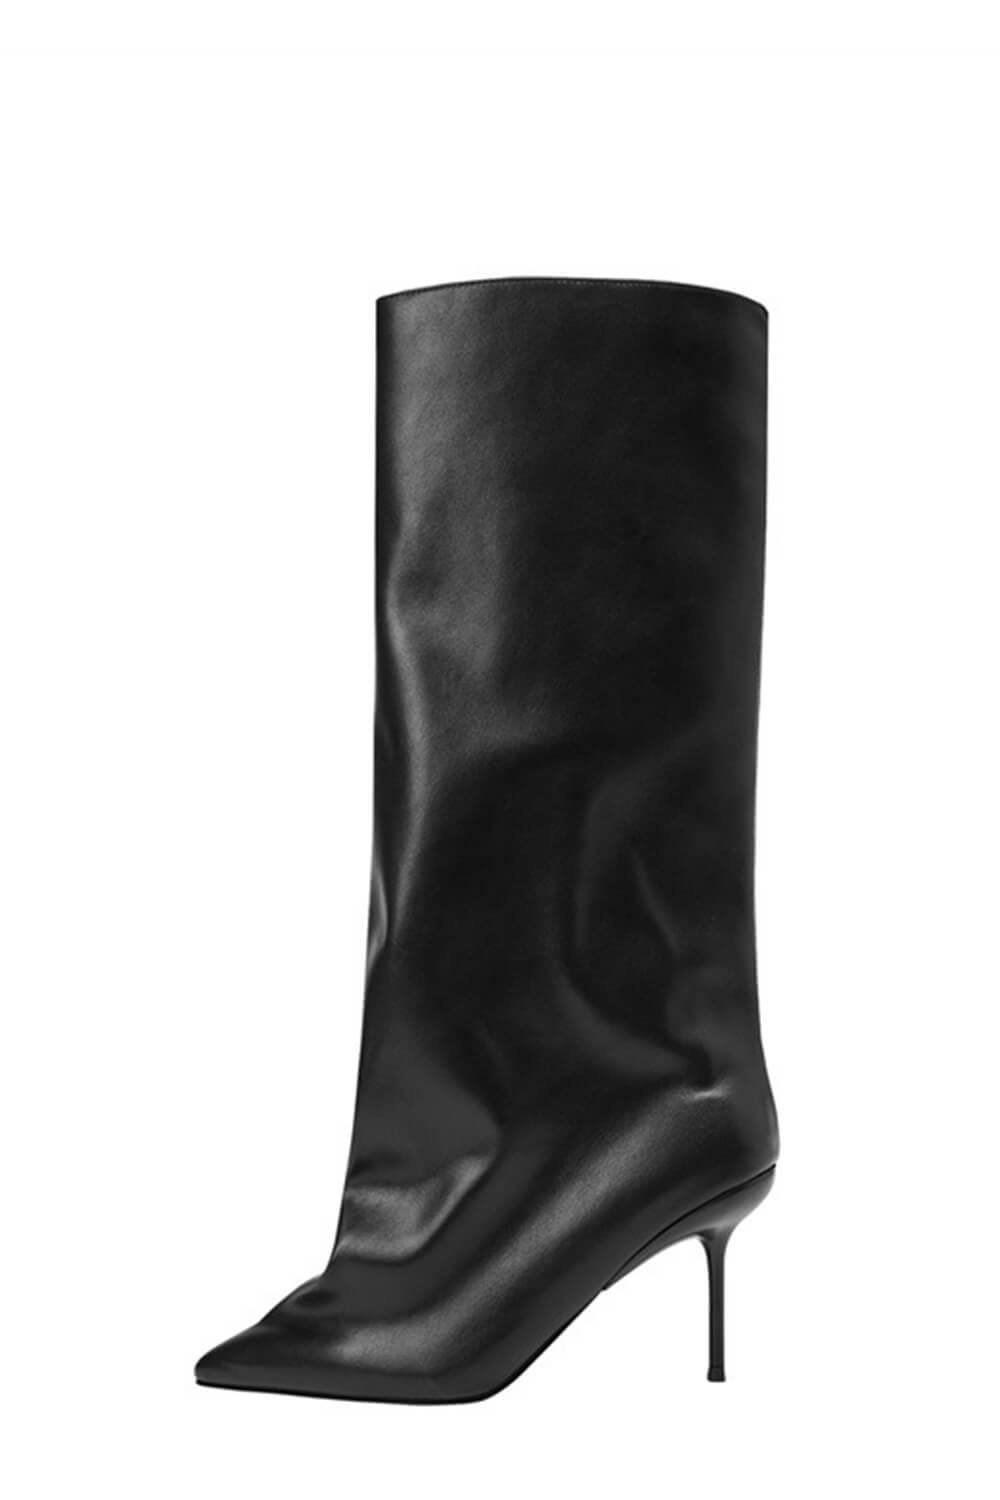 Black Faux Leather Sculptural Pointed Toe Stiletto Boots